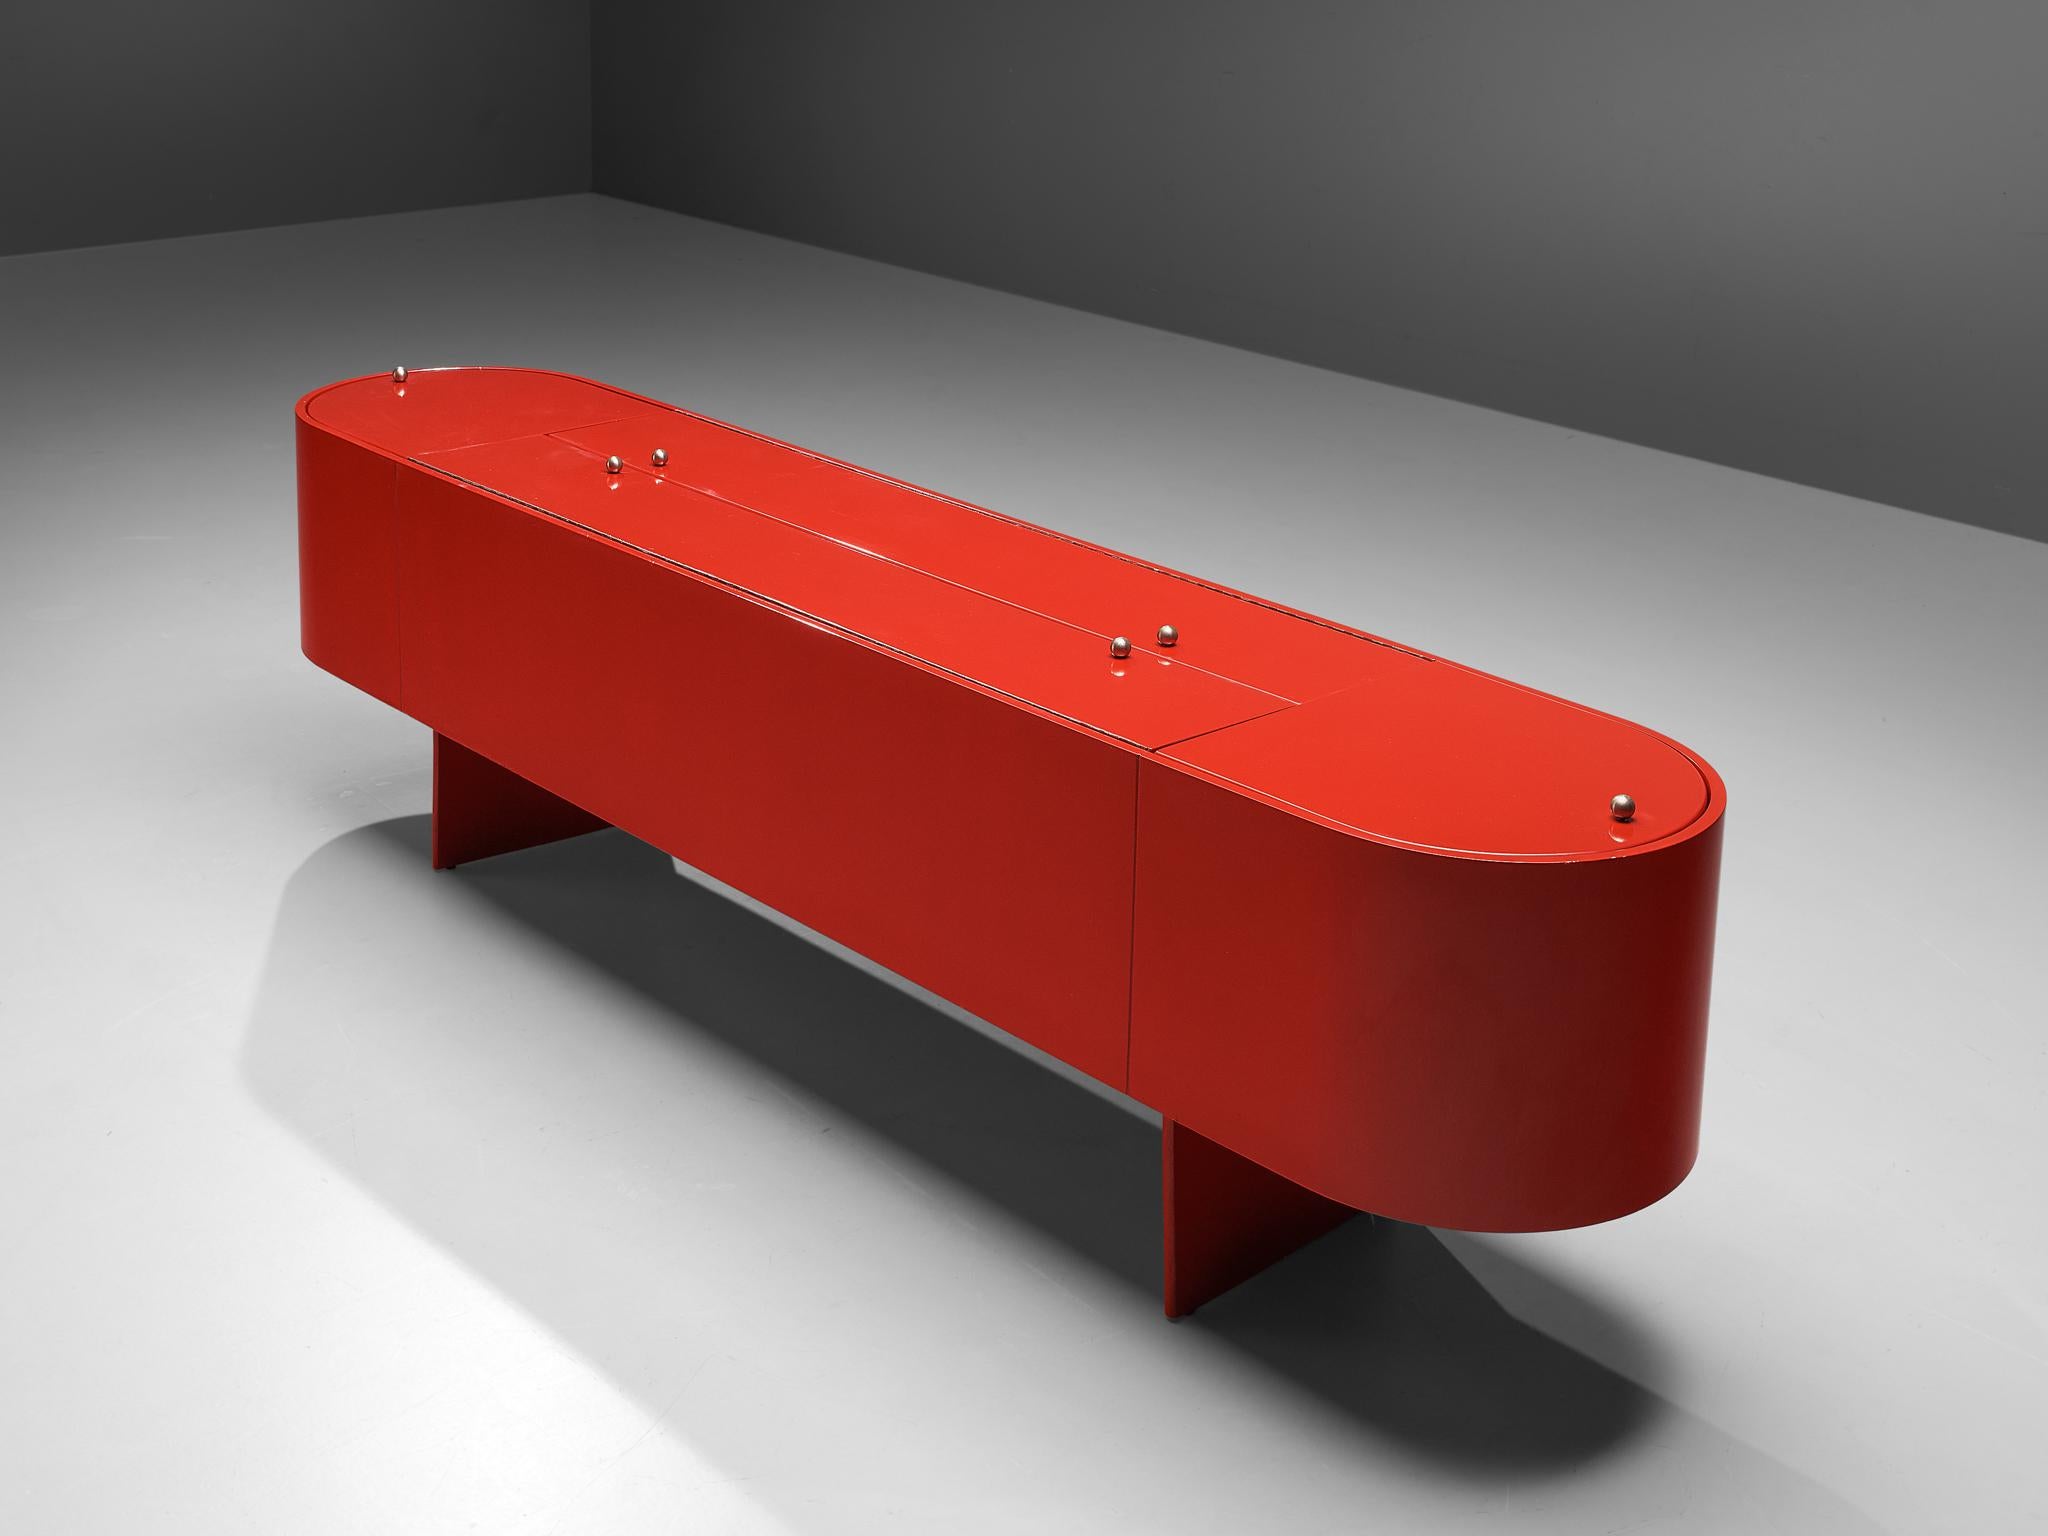 Luigi Saccardo for Arrmat, sideboard with dry bar Model ‘Parentisi’, red lacquered wood, metal, glass, Italy, 1976

The ‘Parentisi’ sideboard with dry bar by Italian designer Luigi Saccardo has two rare features. First, the format is the item is